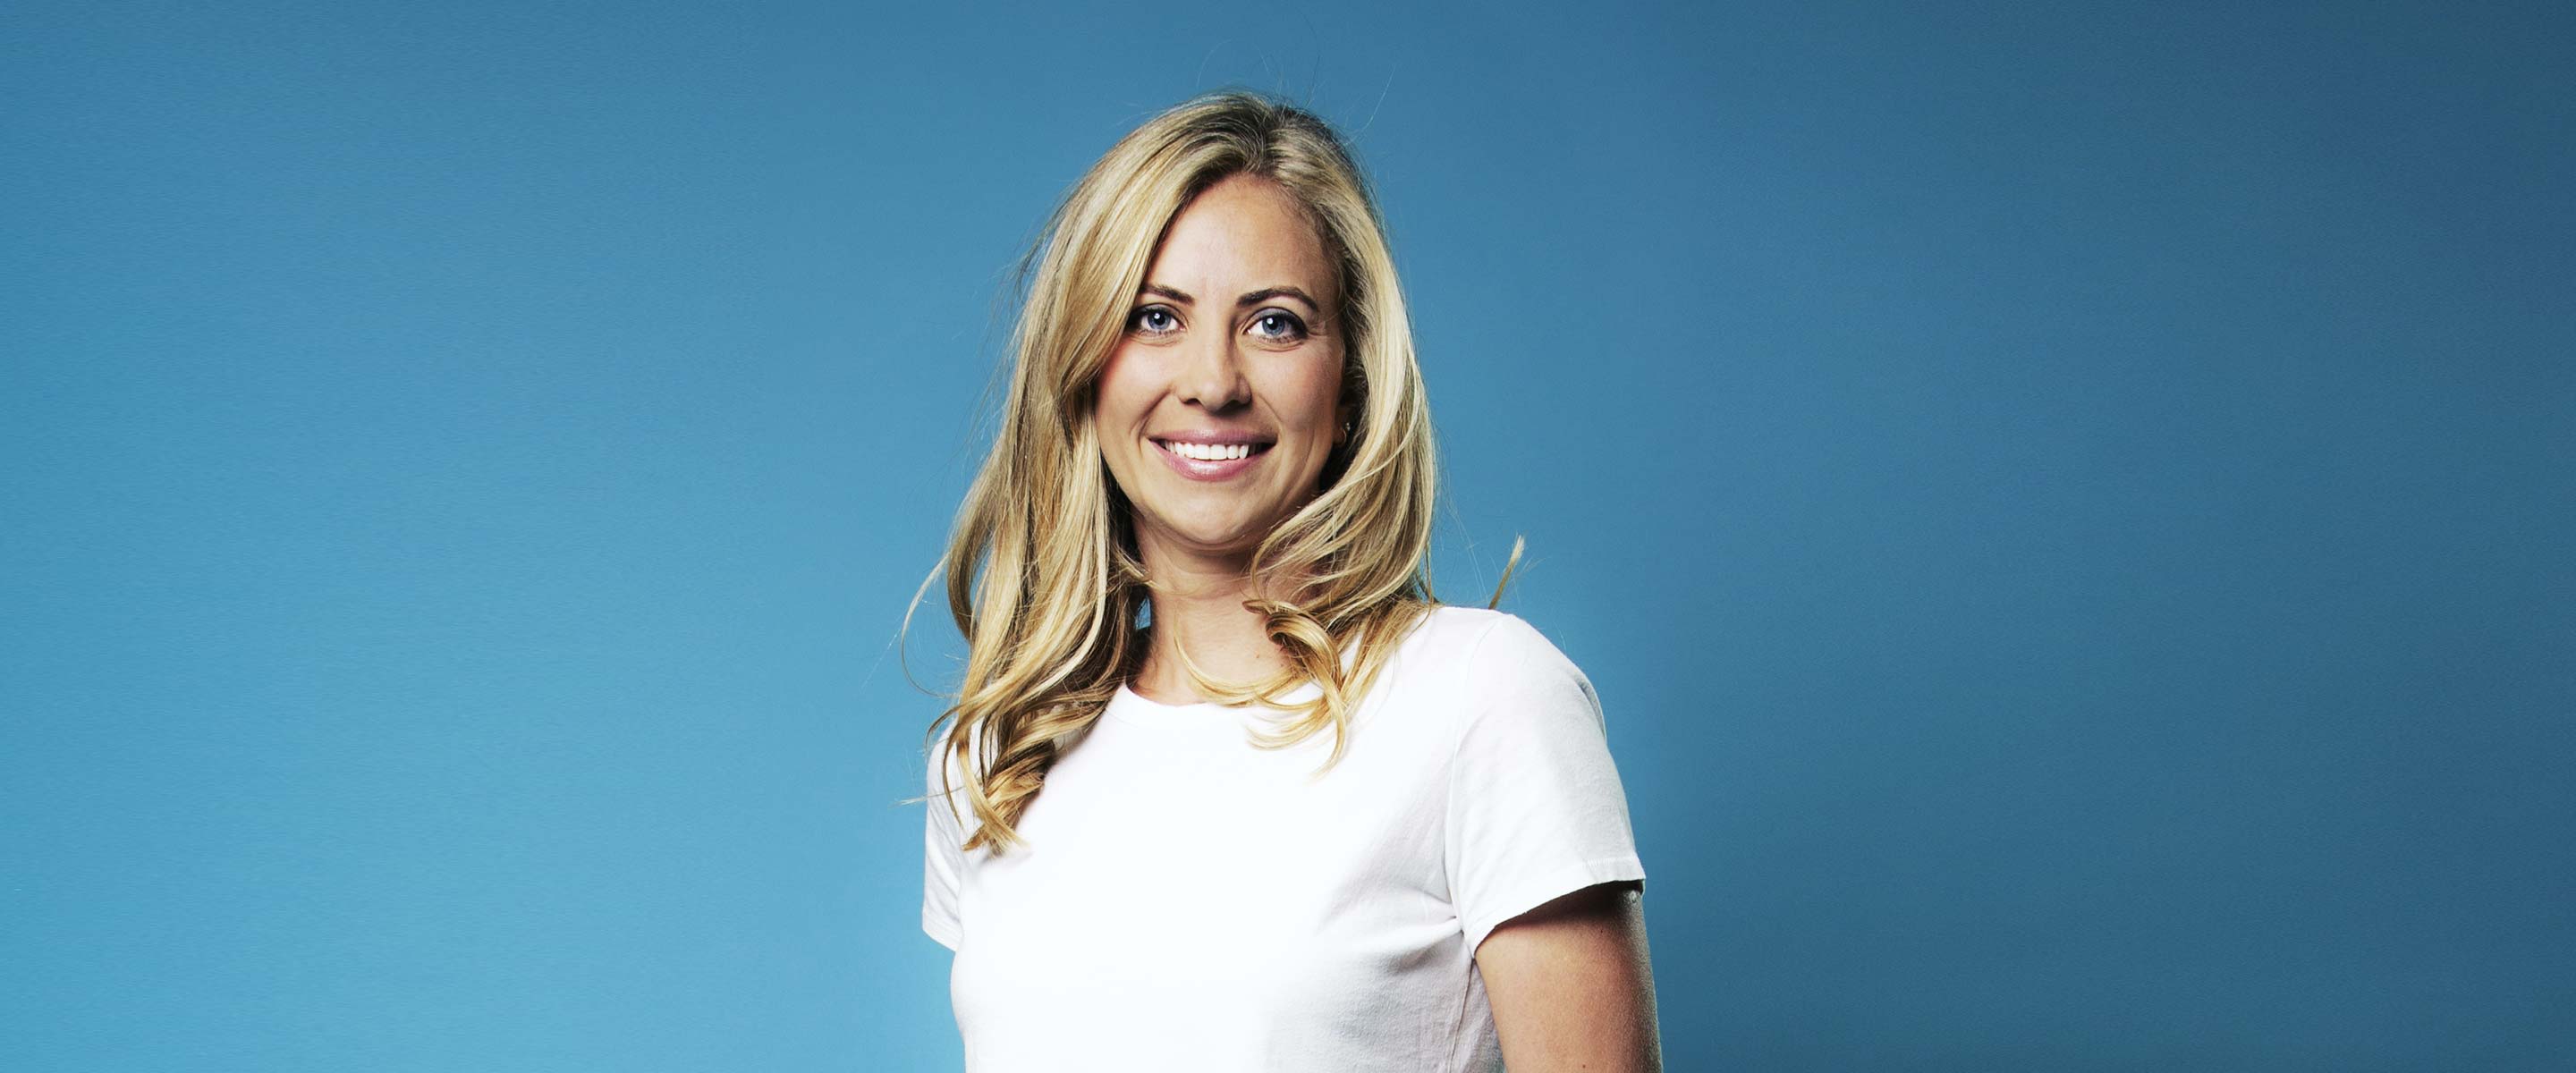 Holly Branson in a white t-shirt standing against a blue background and smiling into the camera